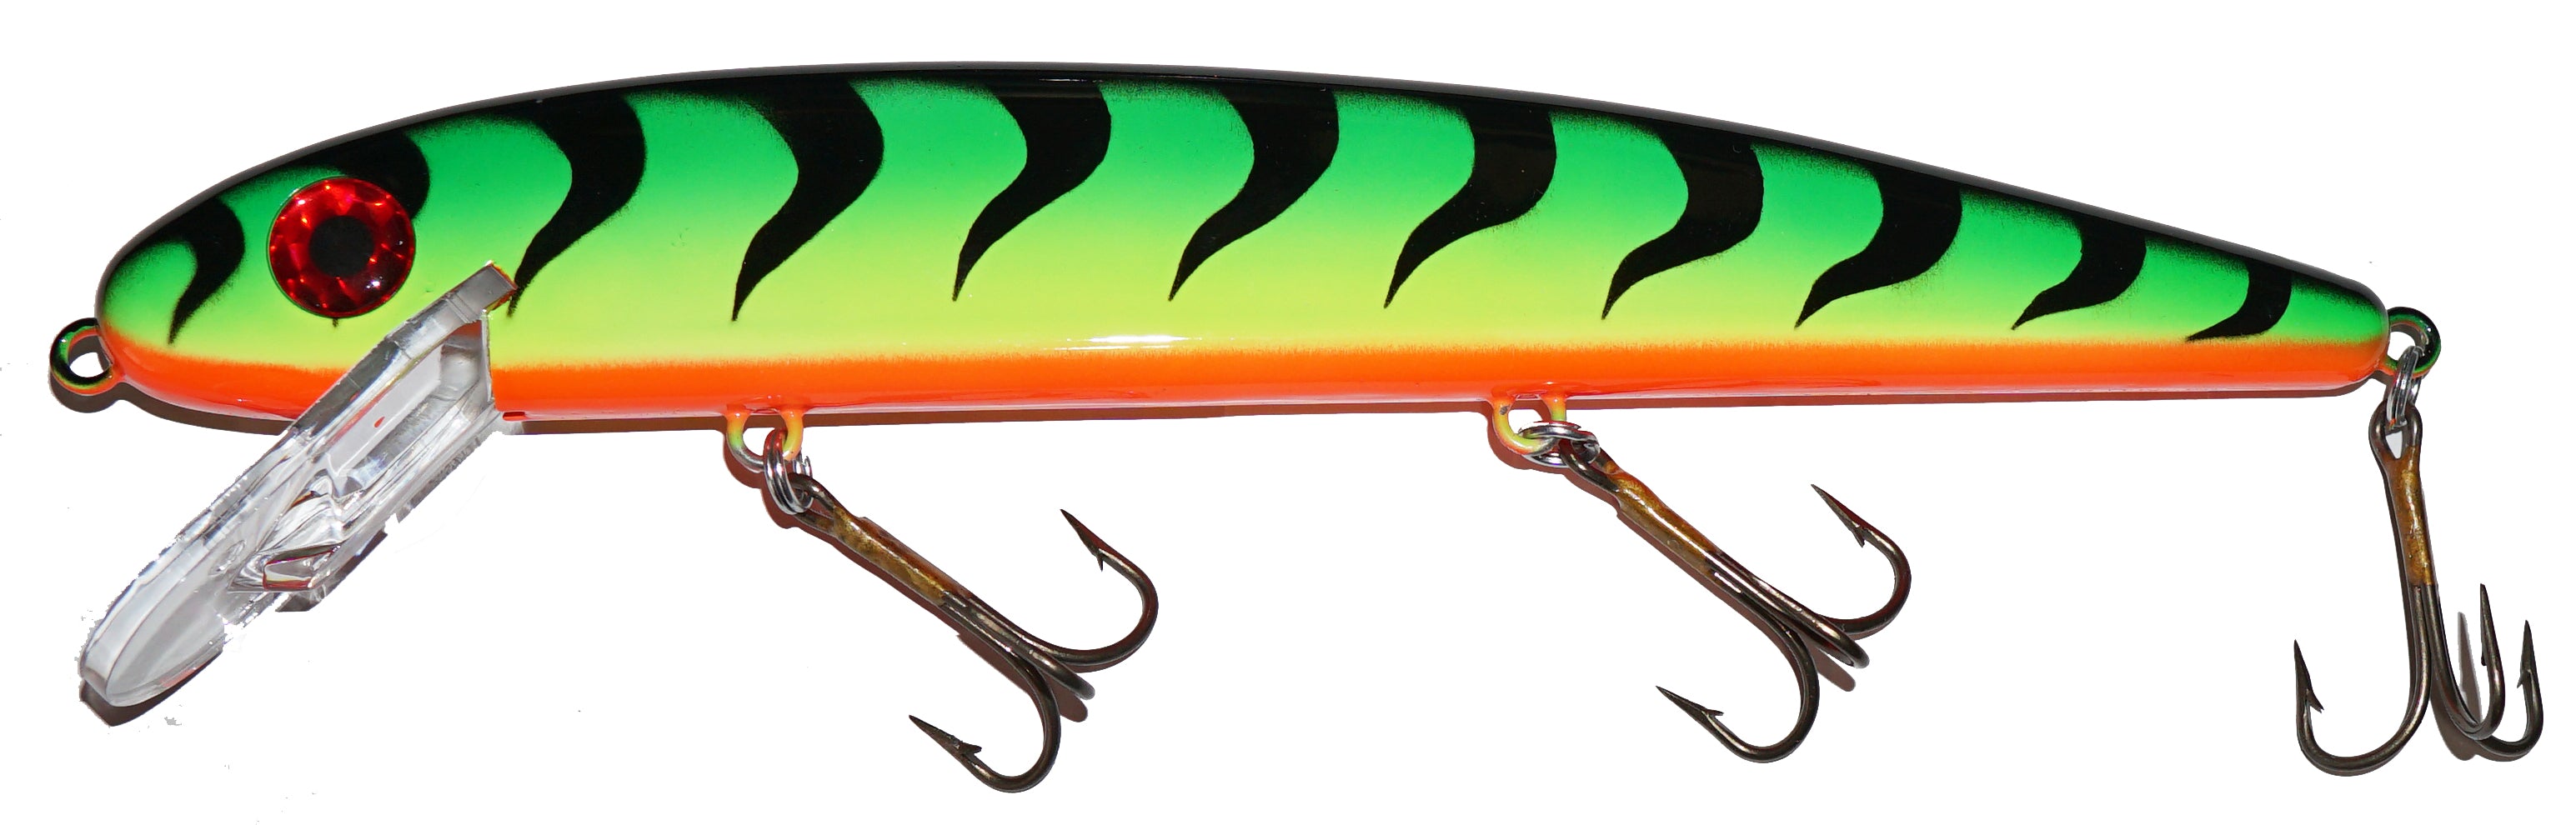 Musky Mania Squirrely Jake Fishing Lures | Cabela's Canada